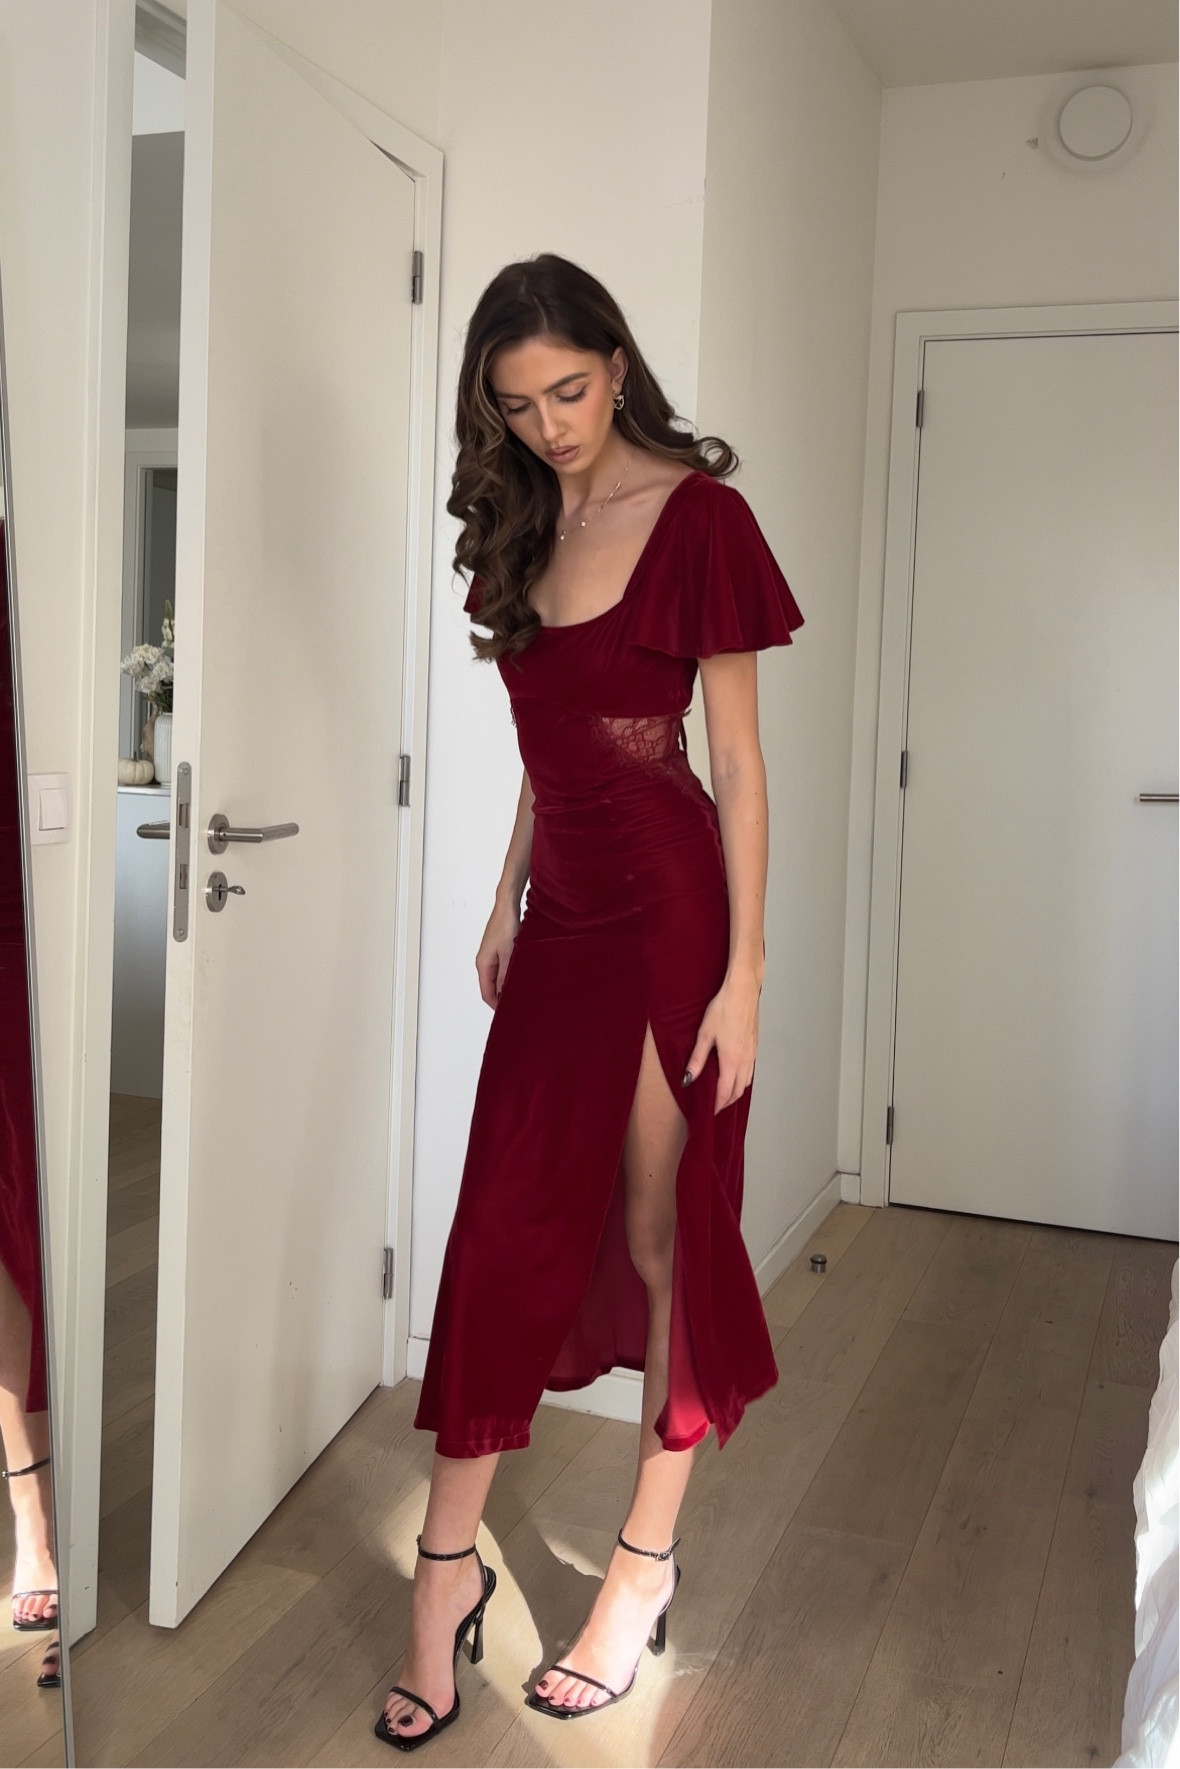 Aueoeo Winter Wedding Guest Dress, Fall Wedding Guest Dresses for